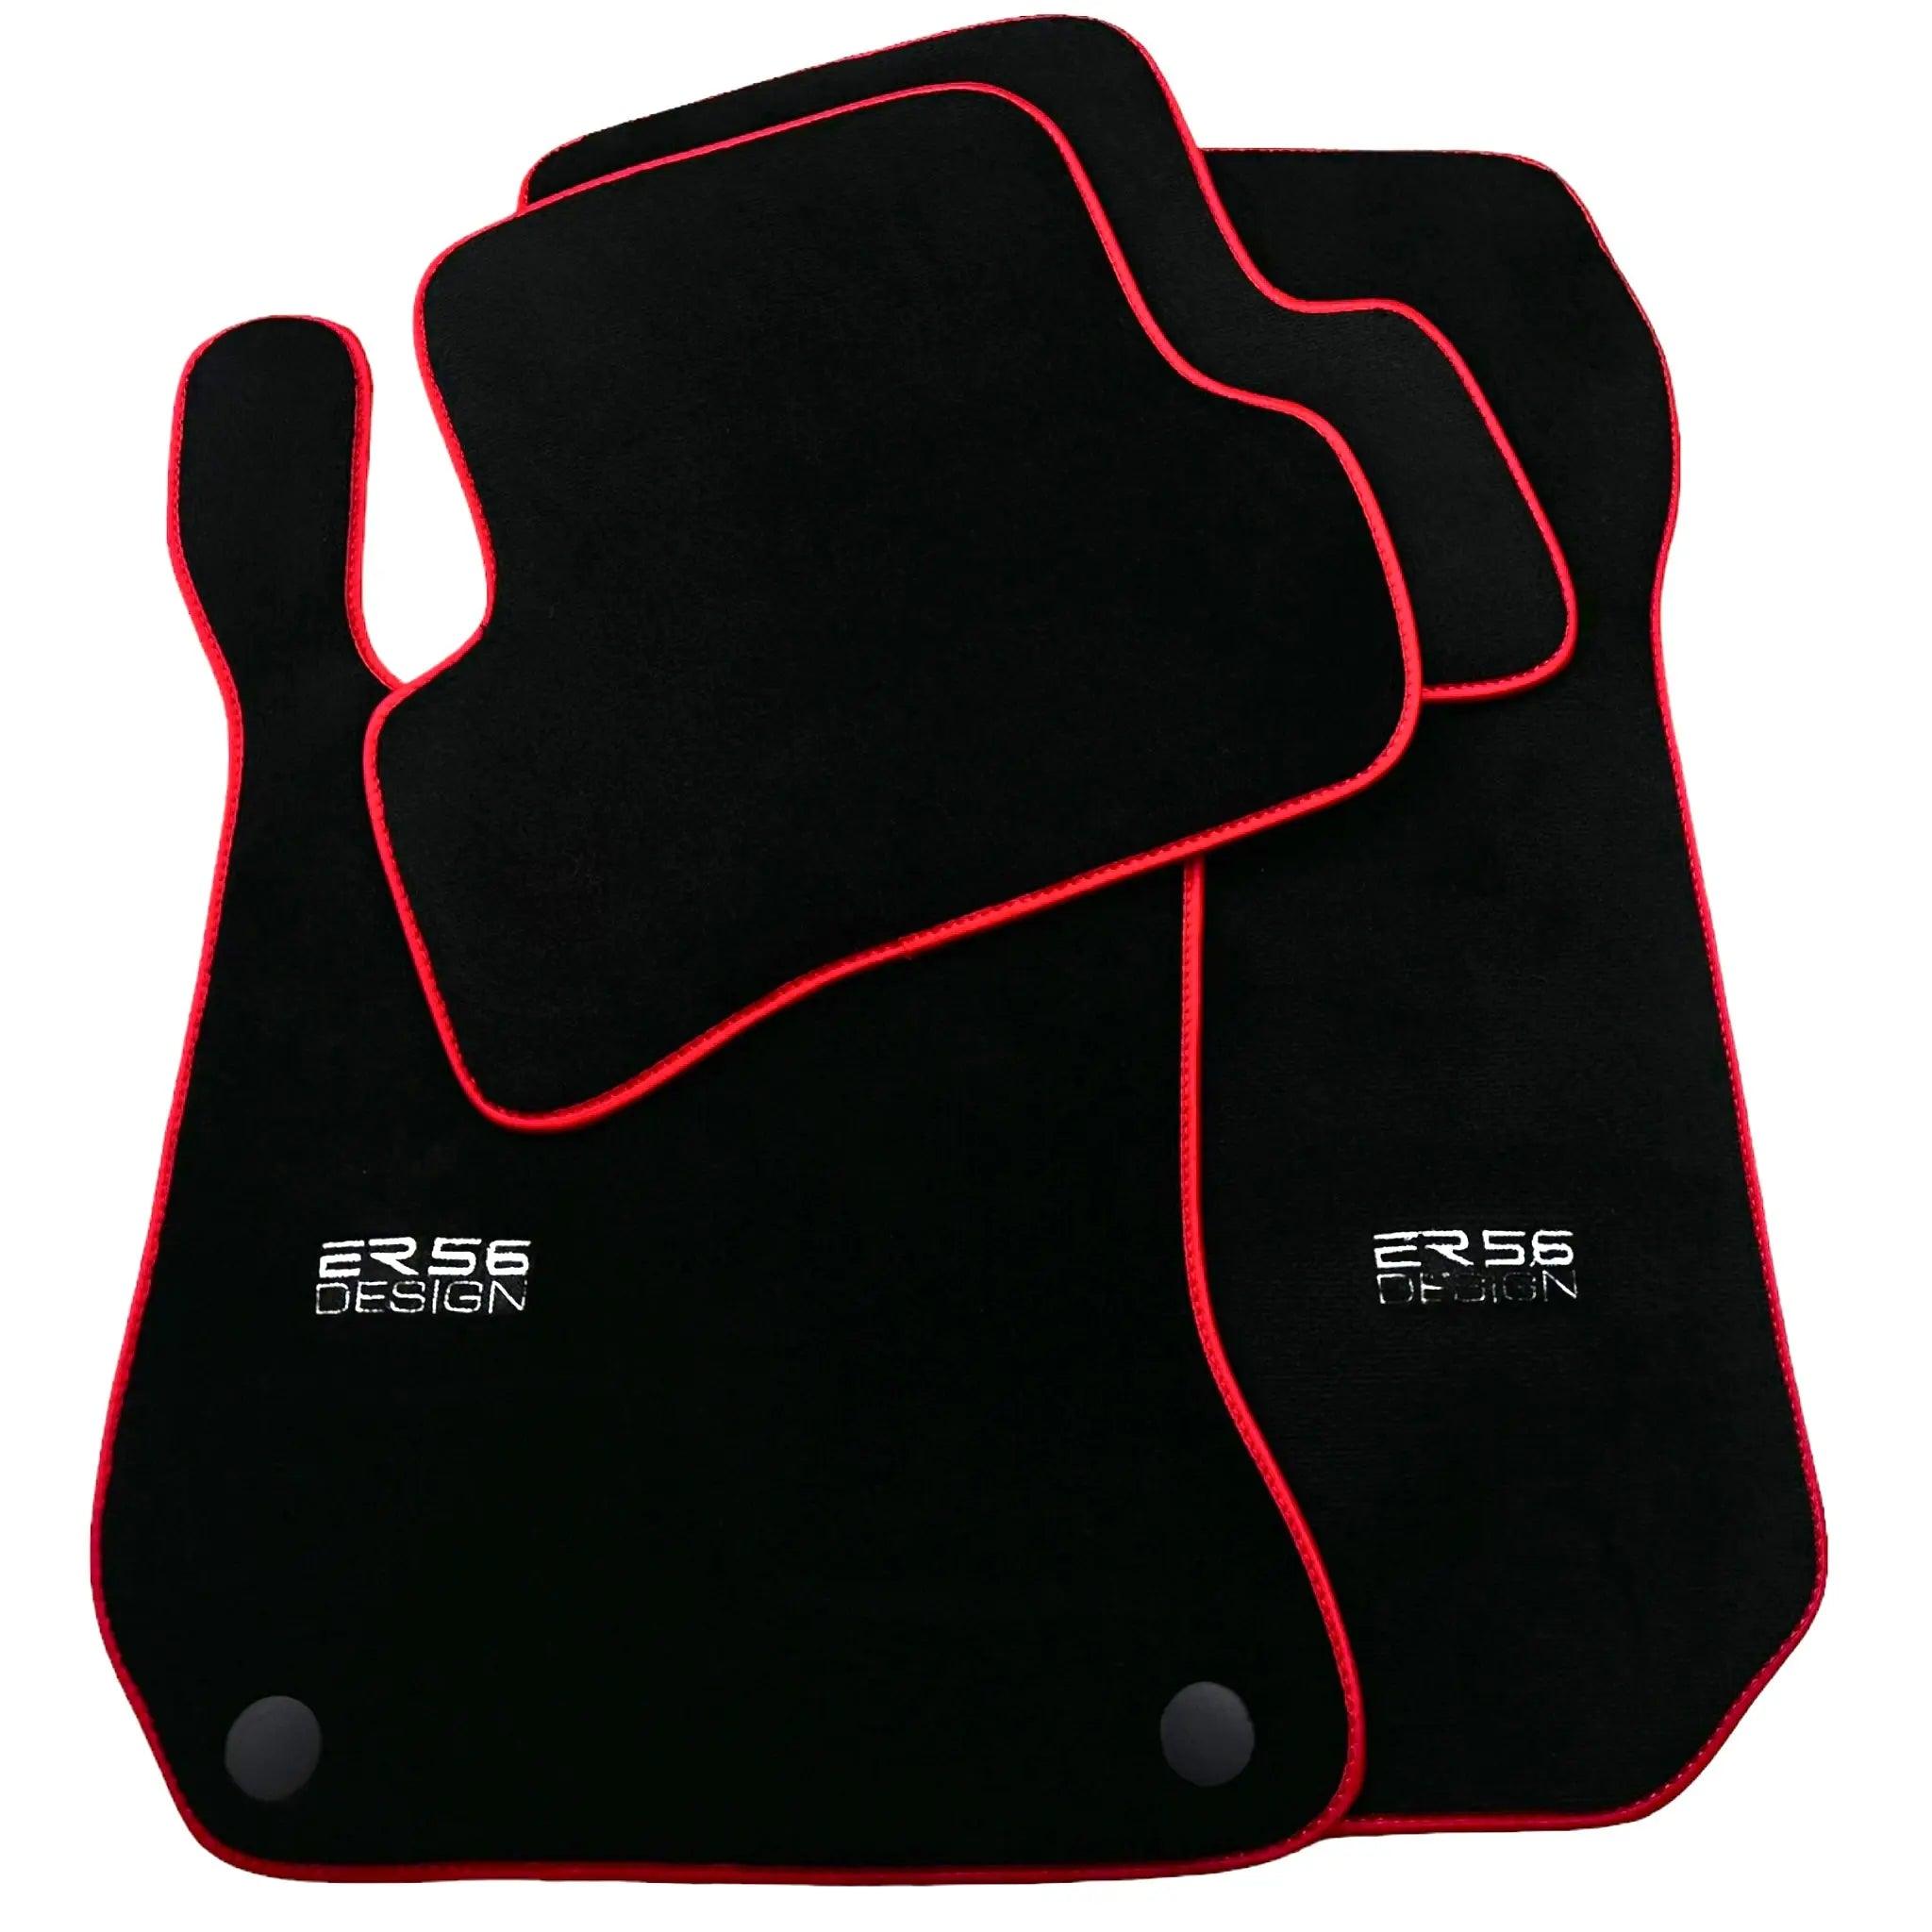 Black Floor Mats For Mercedes-Benz C Class W204 Coupe 2012-2015 ER56 Design with Red Trim